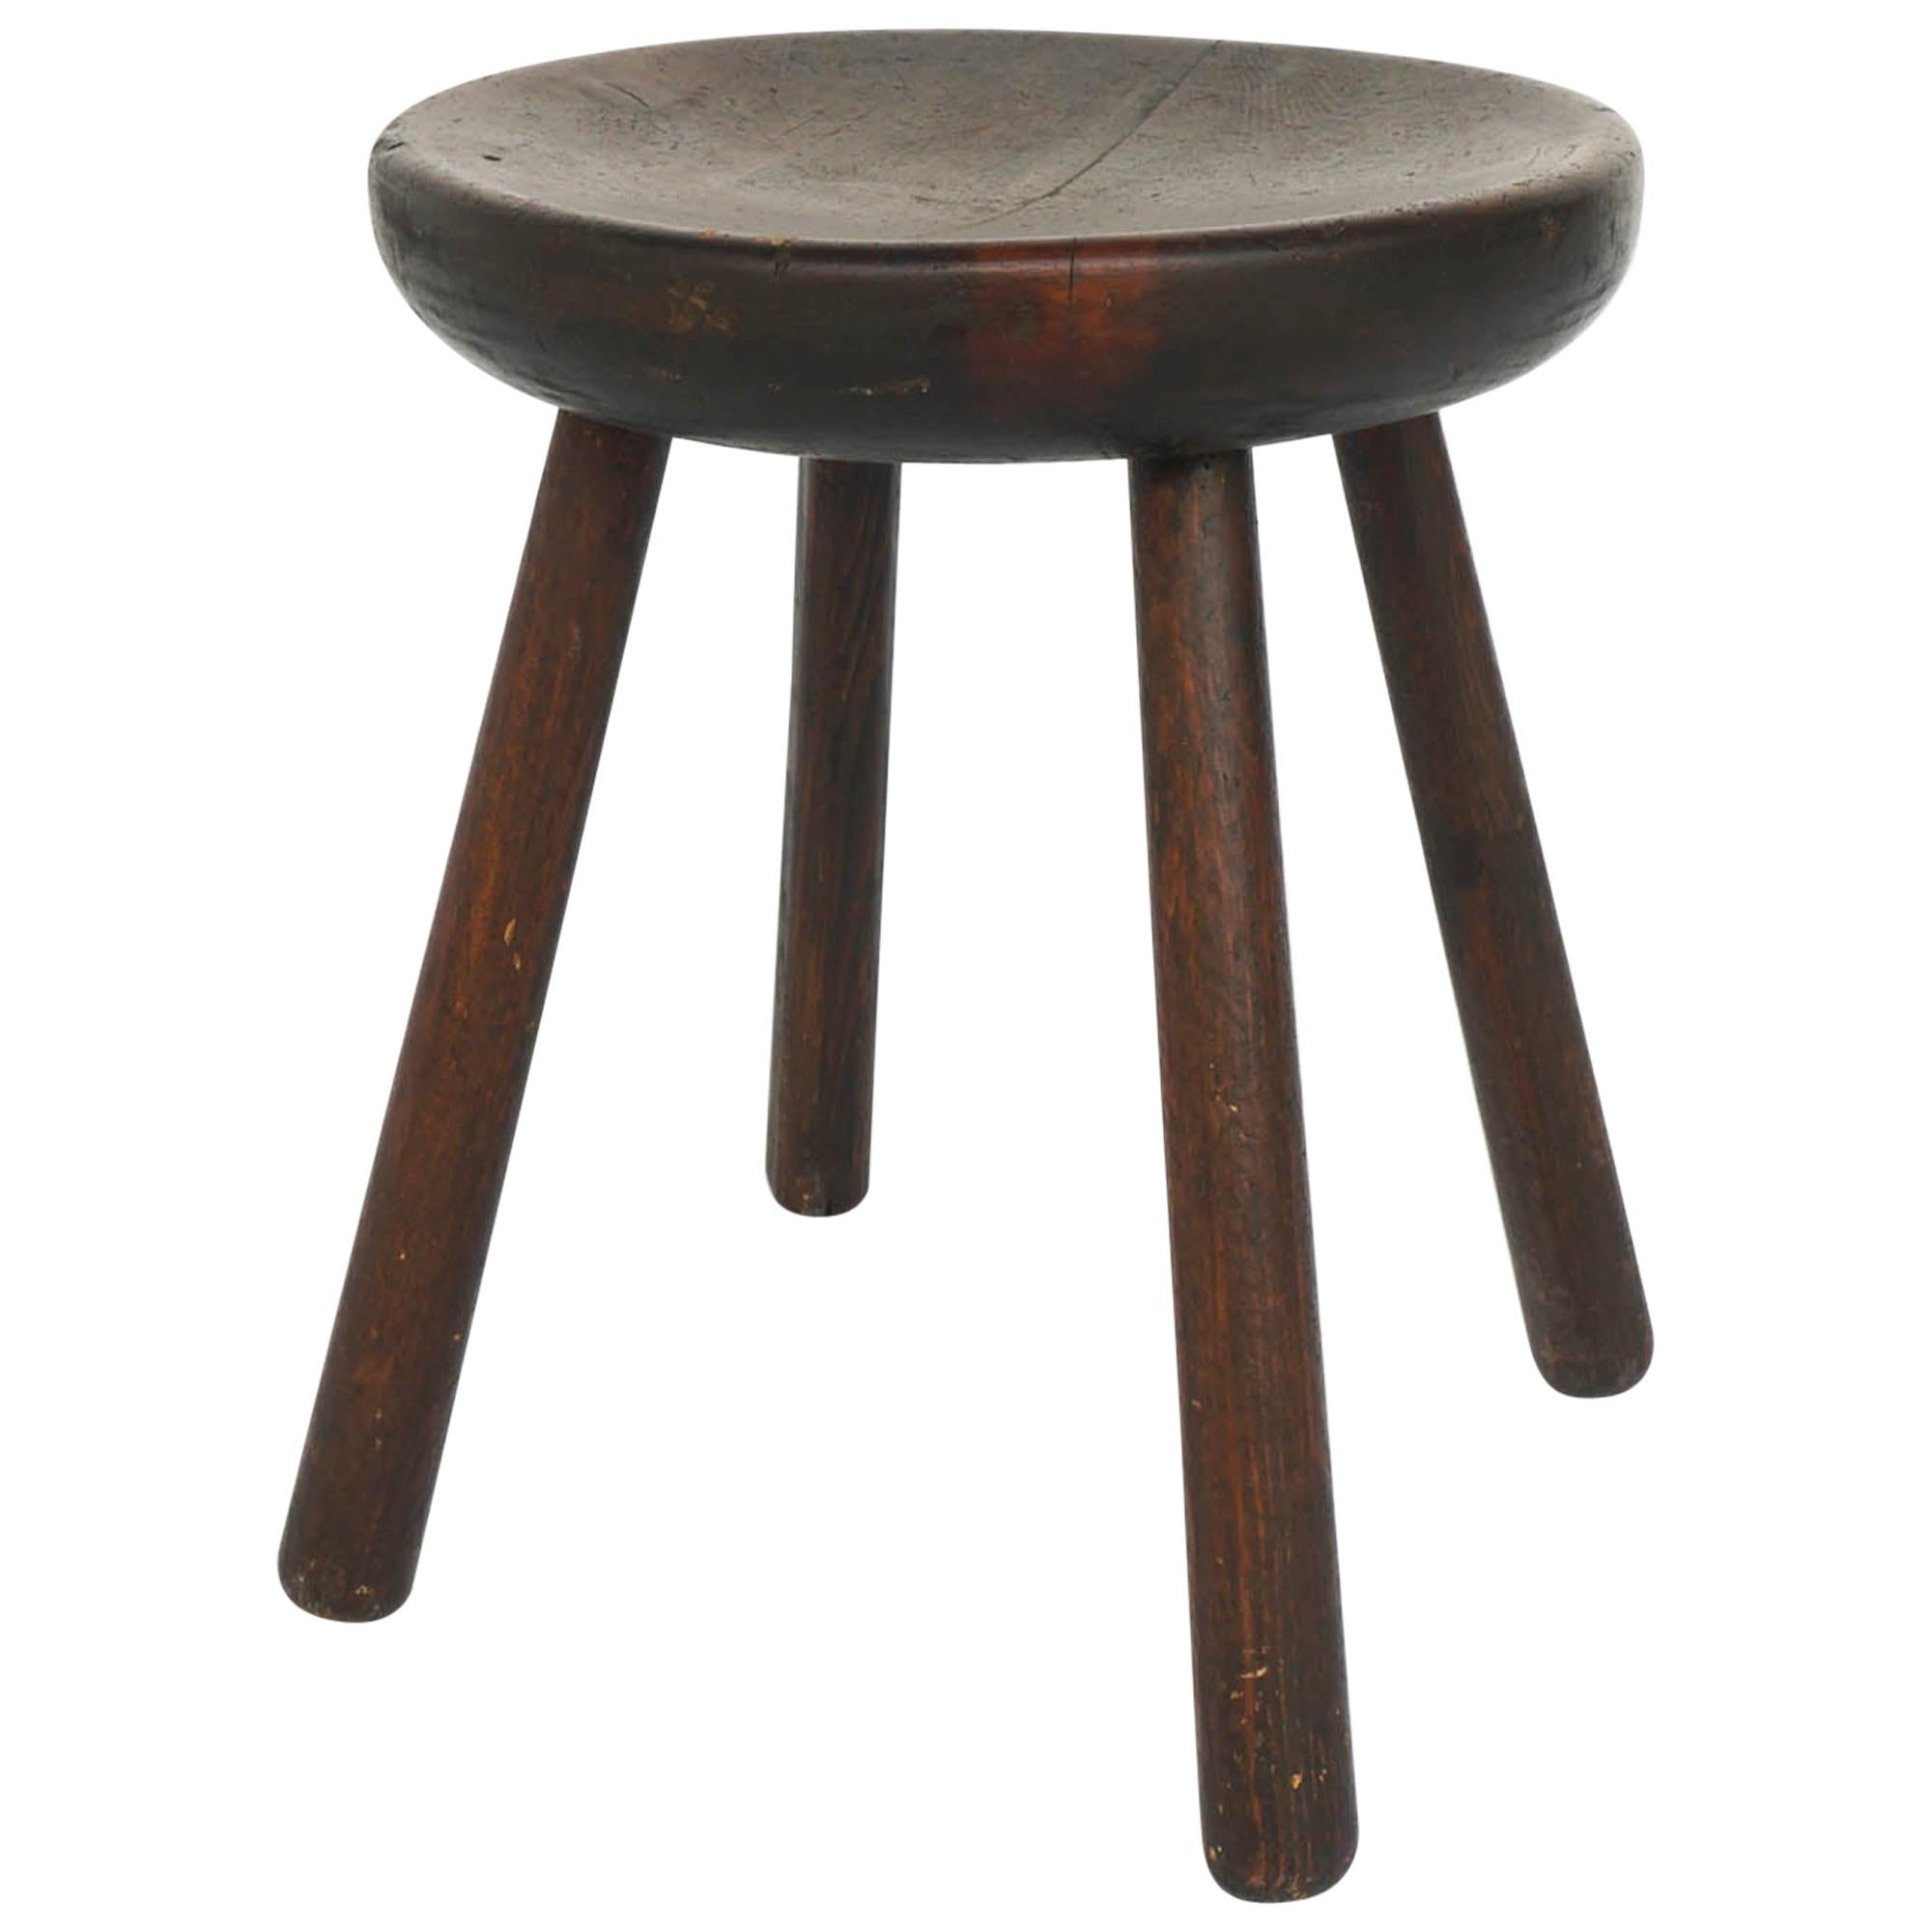 Charlotte Perriand Stool "Marteau" from Les Arcs Resort, France, Late 1960 For Sale